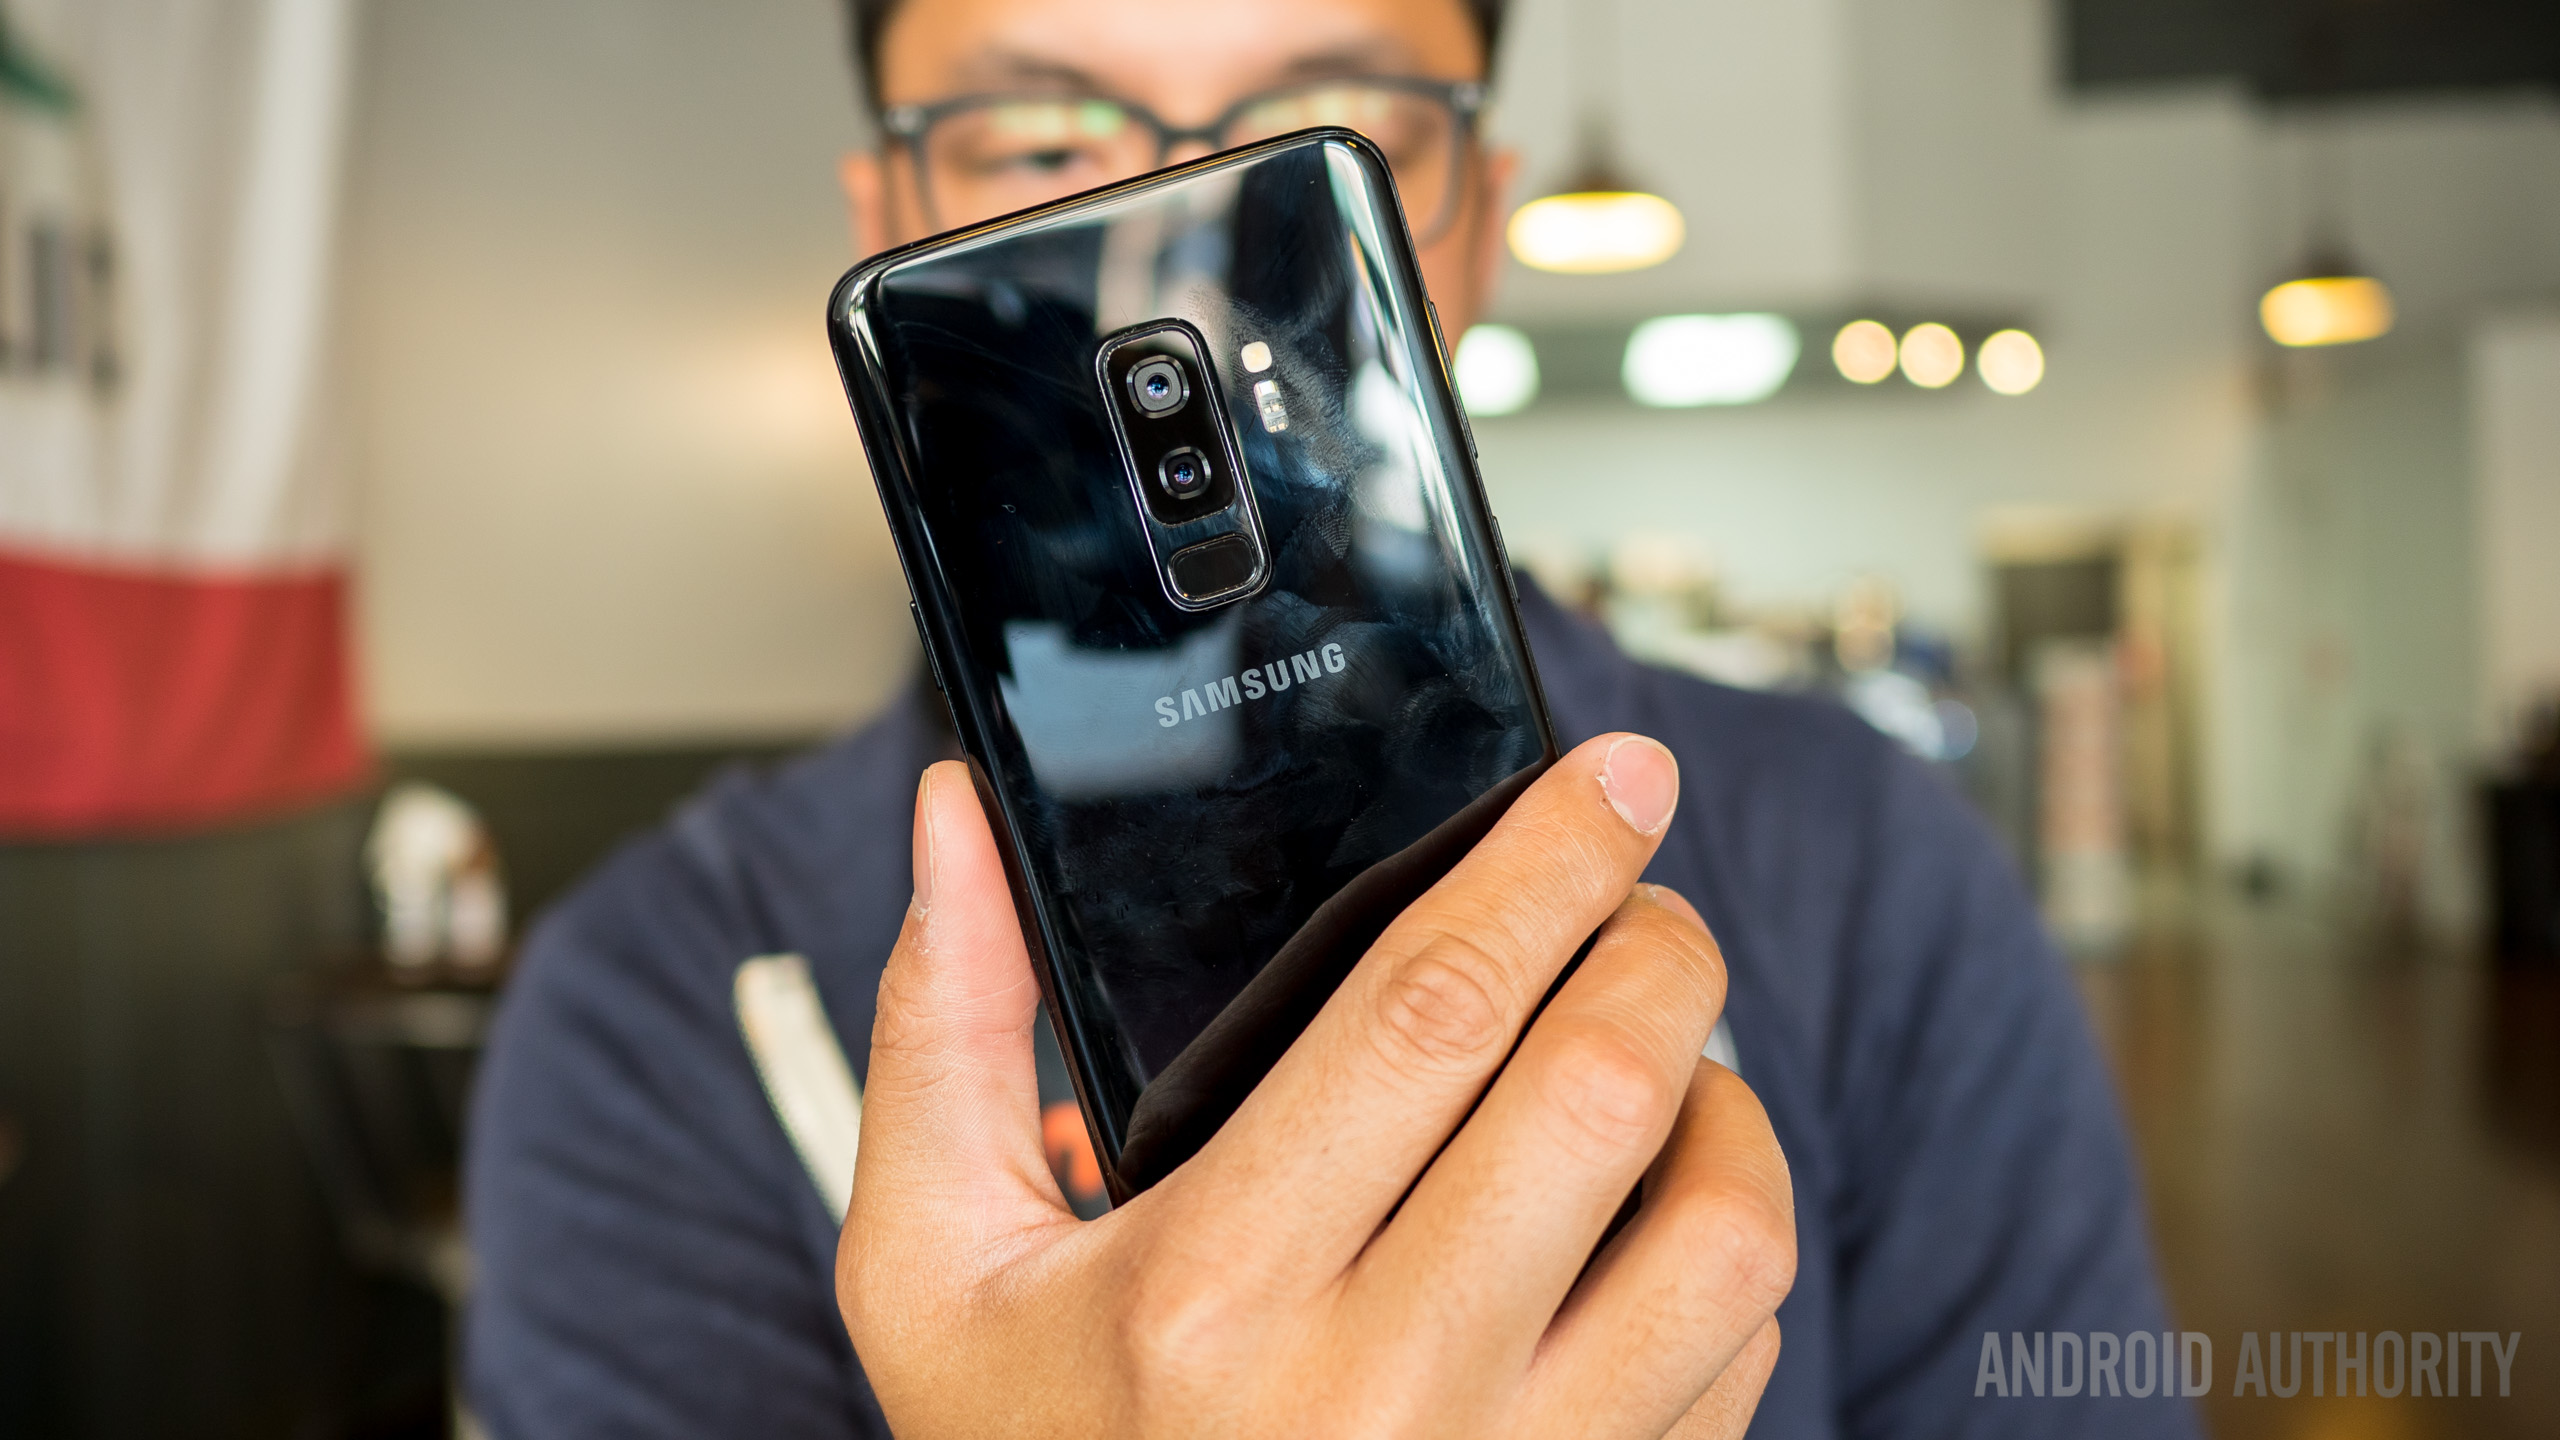 official store samsung galaxy s9 price in india